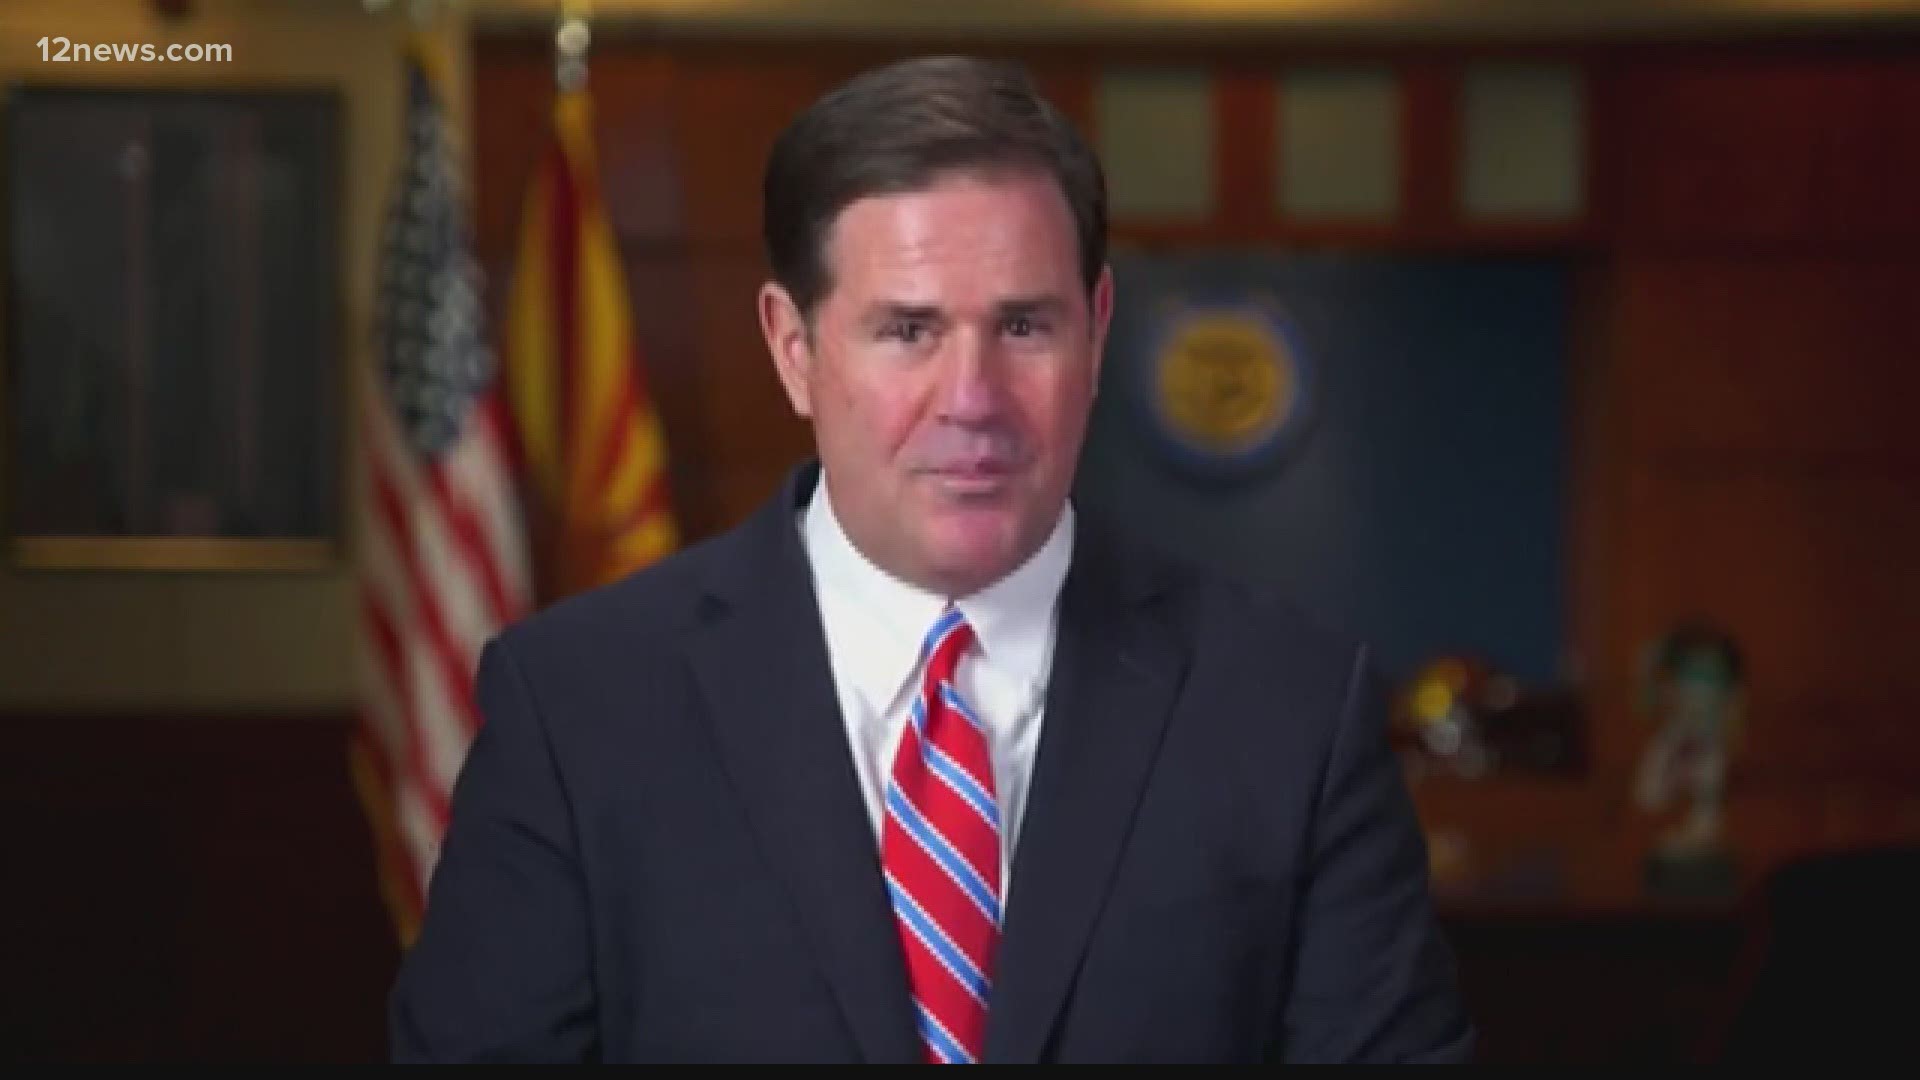 A major tax cut from Governor Ducey will soon become law. He says the average tax payer will pocket $350 a year, but is that really true?